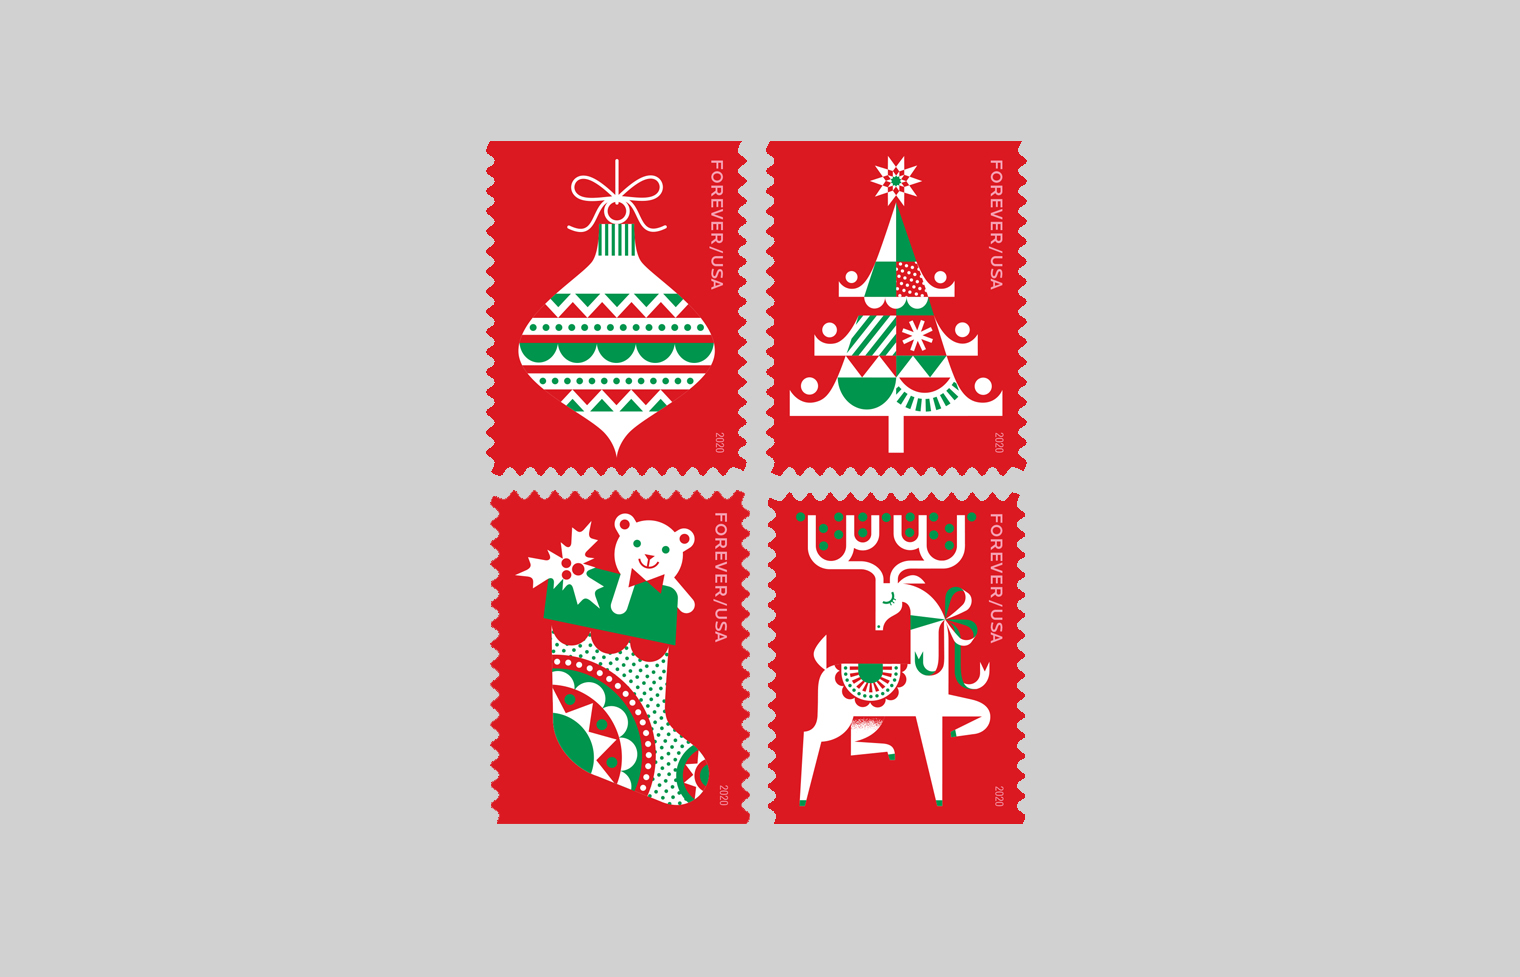 Celebrating Christmas with modern illustrations of an ornament, a decorated tree, a stocking, and a reindeer in red & green.